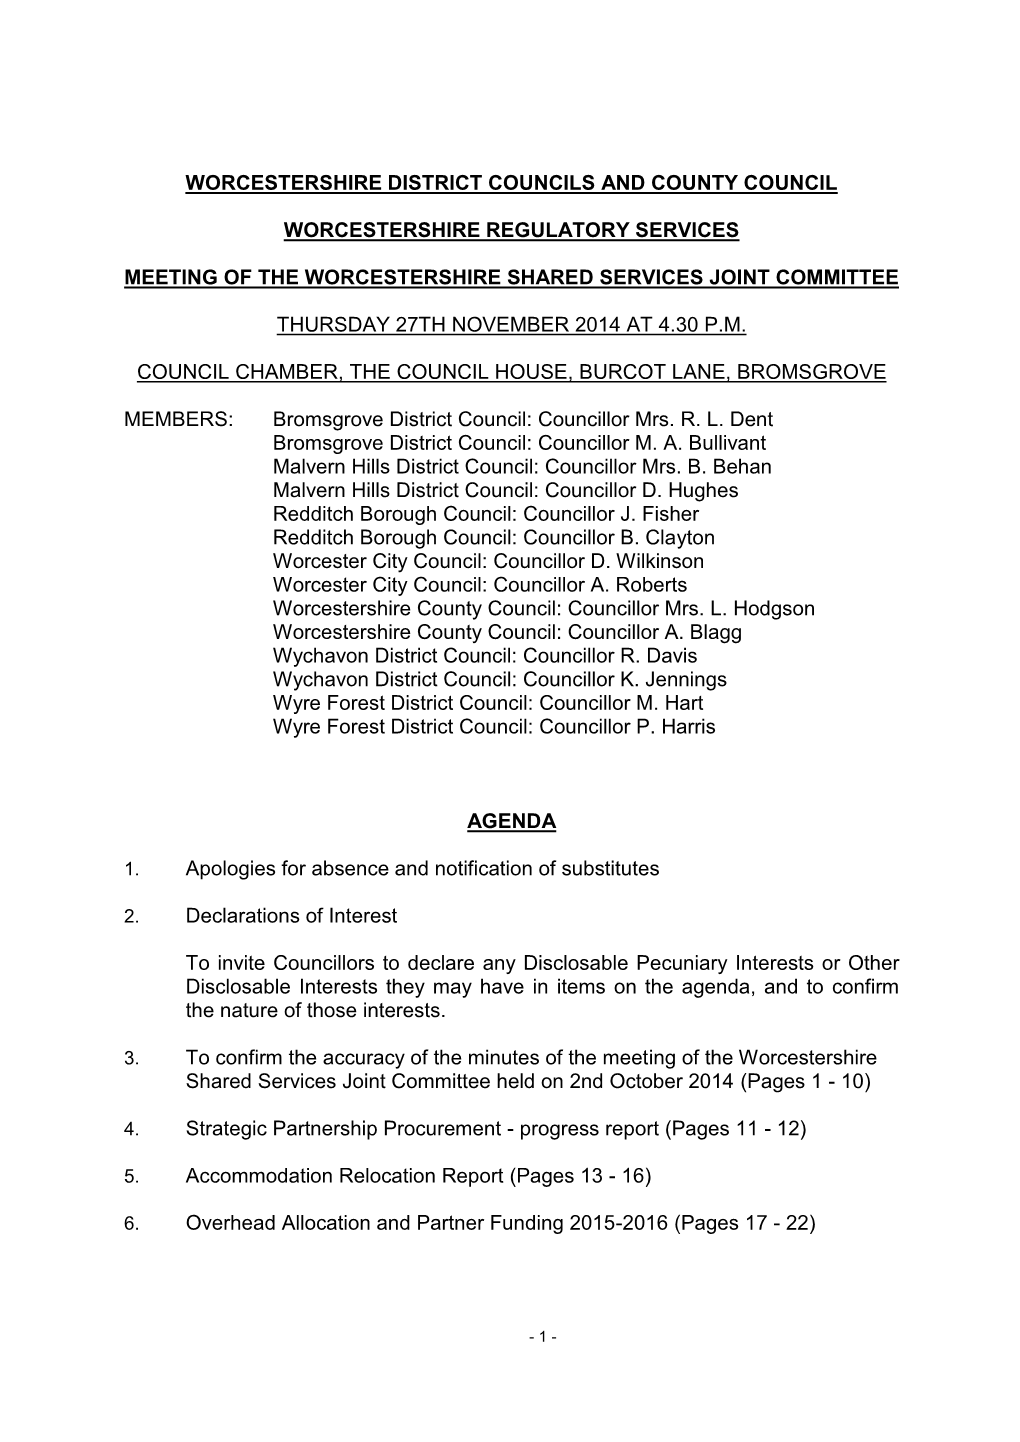 Agenda Document for Worcestershire Shared Services Joint Committee